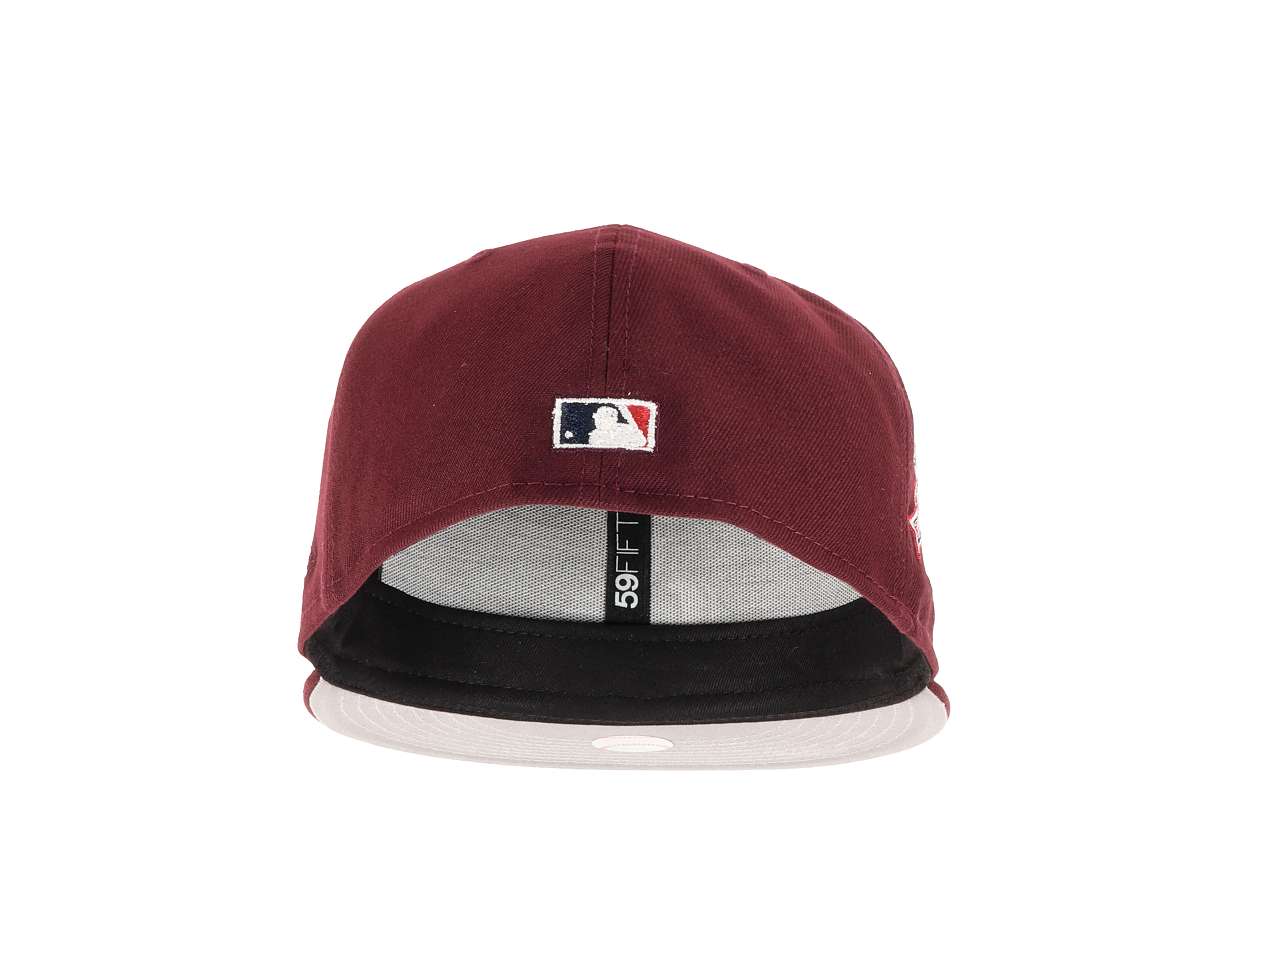 Cleveland Indians MLB Jacobs Field 10th Anniversary Sidepatch Maroon 59Fifty Basecap New Era